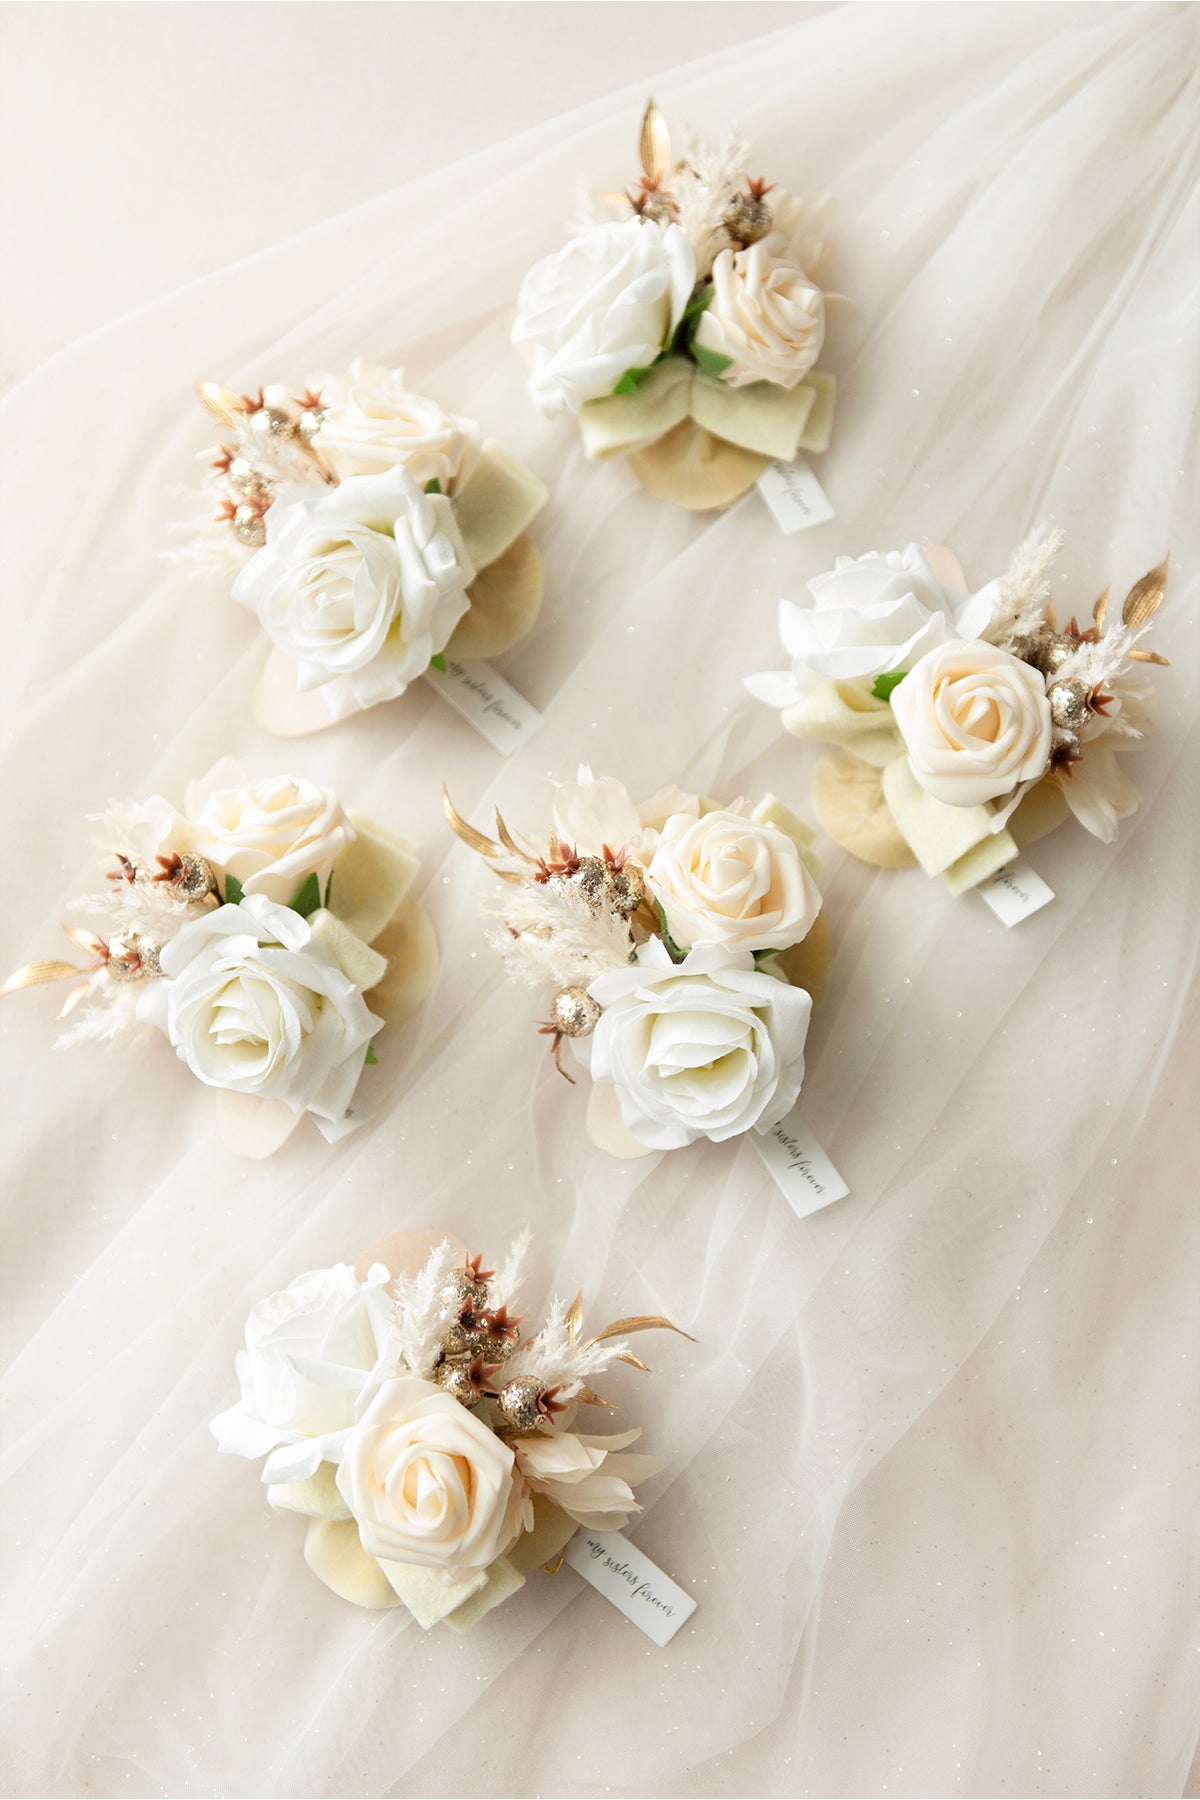 Additional Flower Decorations in White & Beige